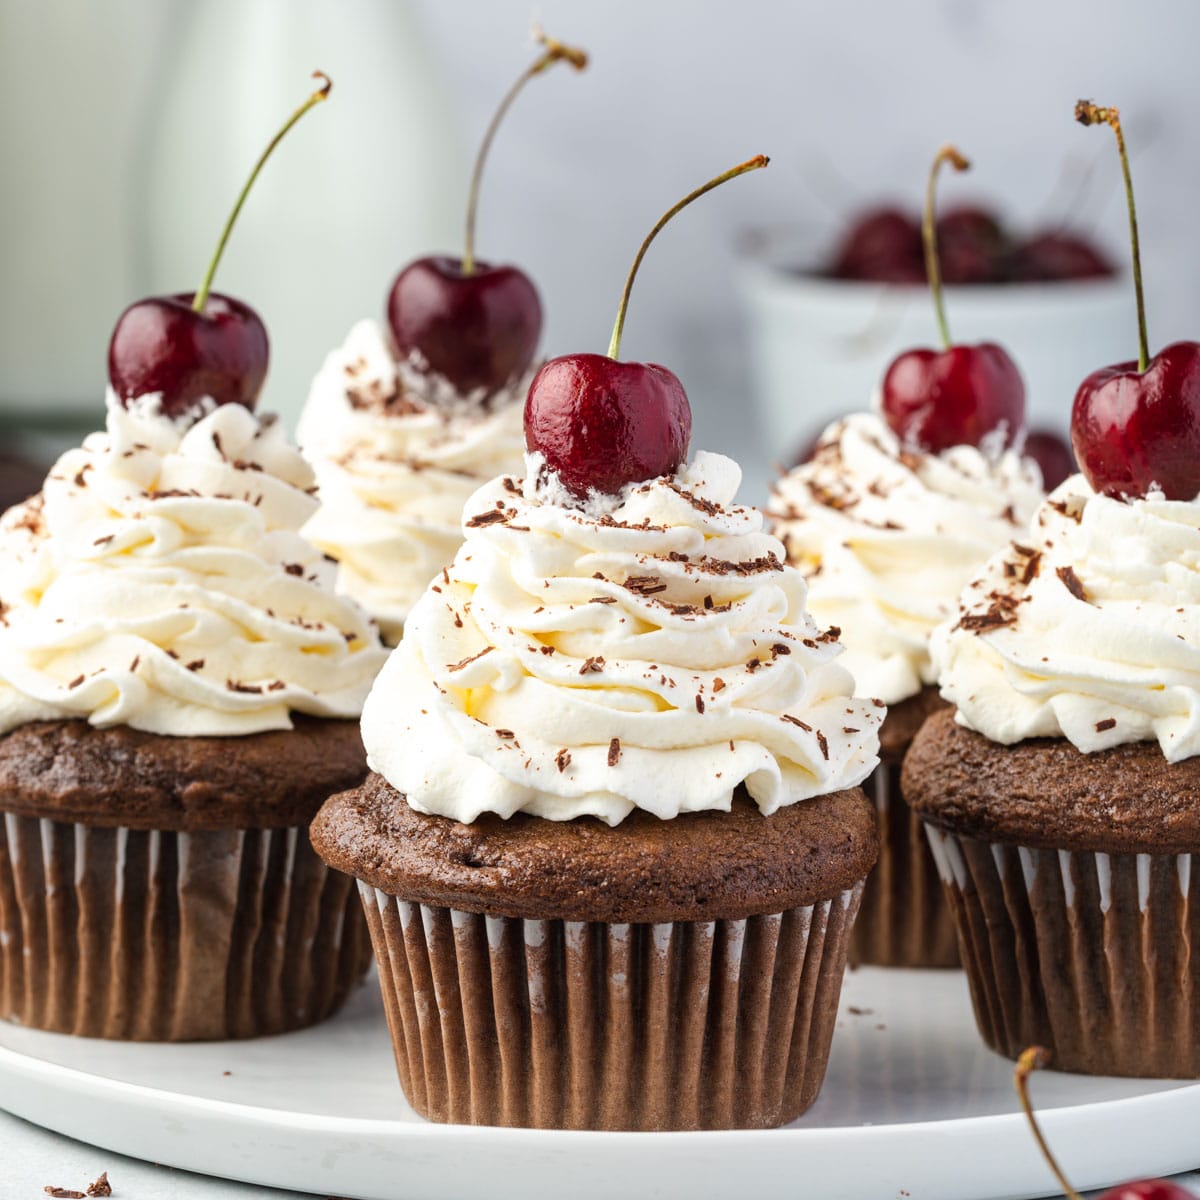 https://stateofdinner.com/wp-content/uploads/2021/02/black-forest-cupcakes-featured.jpg